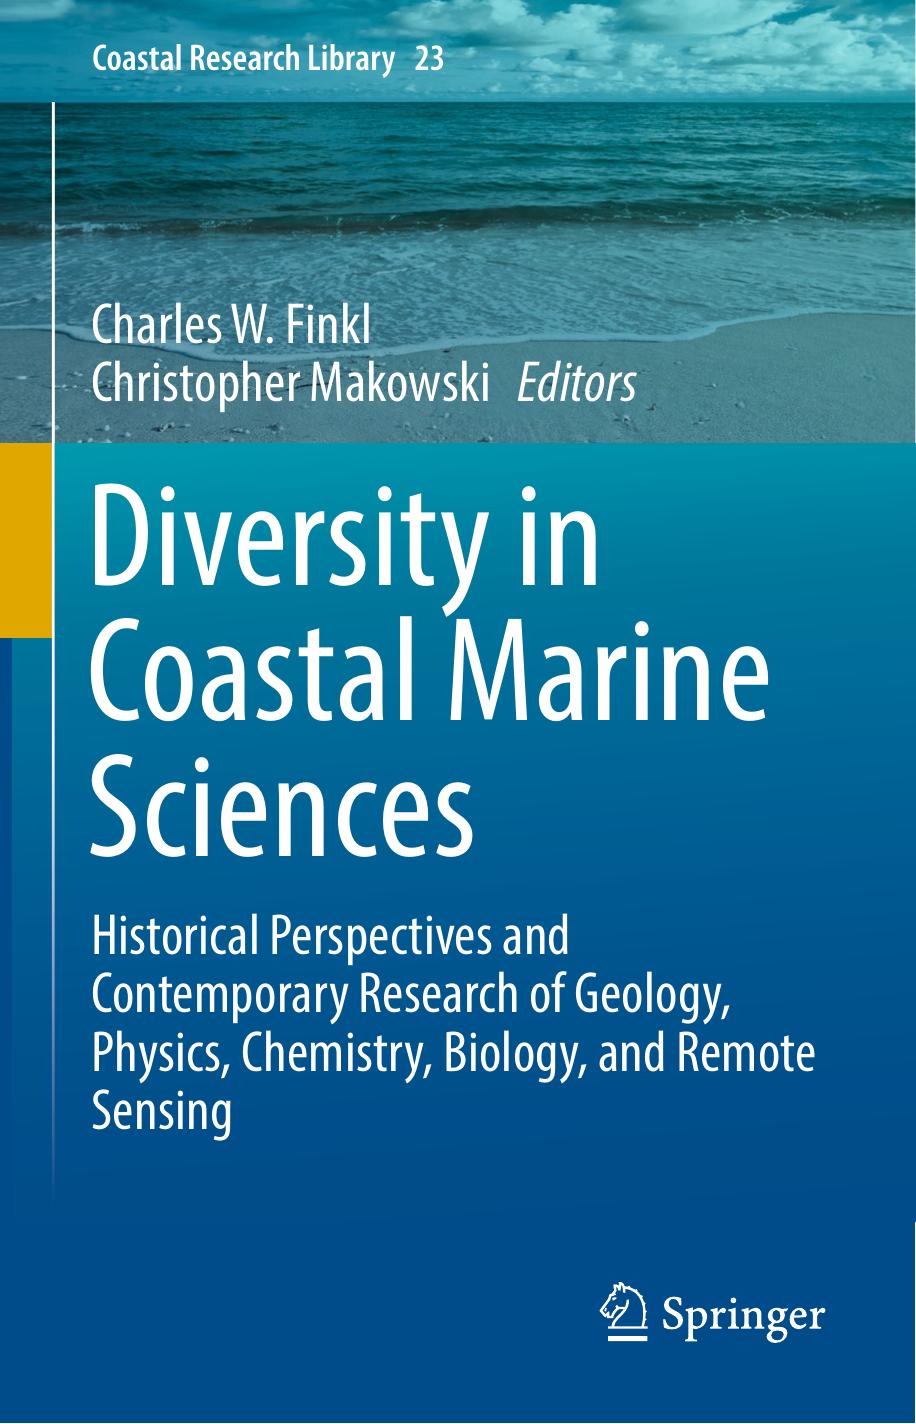 Diversity in coastal marine sciences historical perspectives and contemporary research of geology, ,  2018